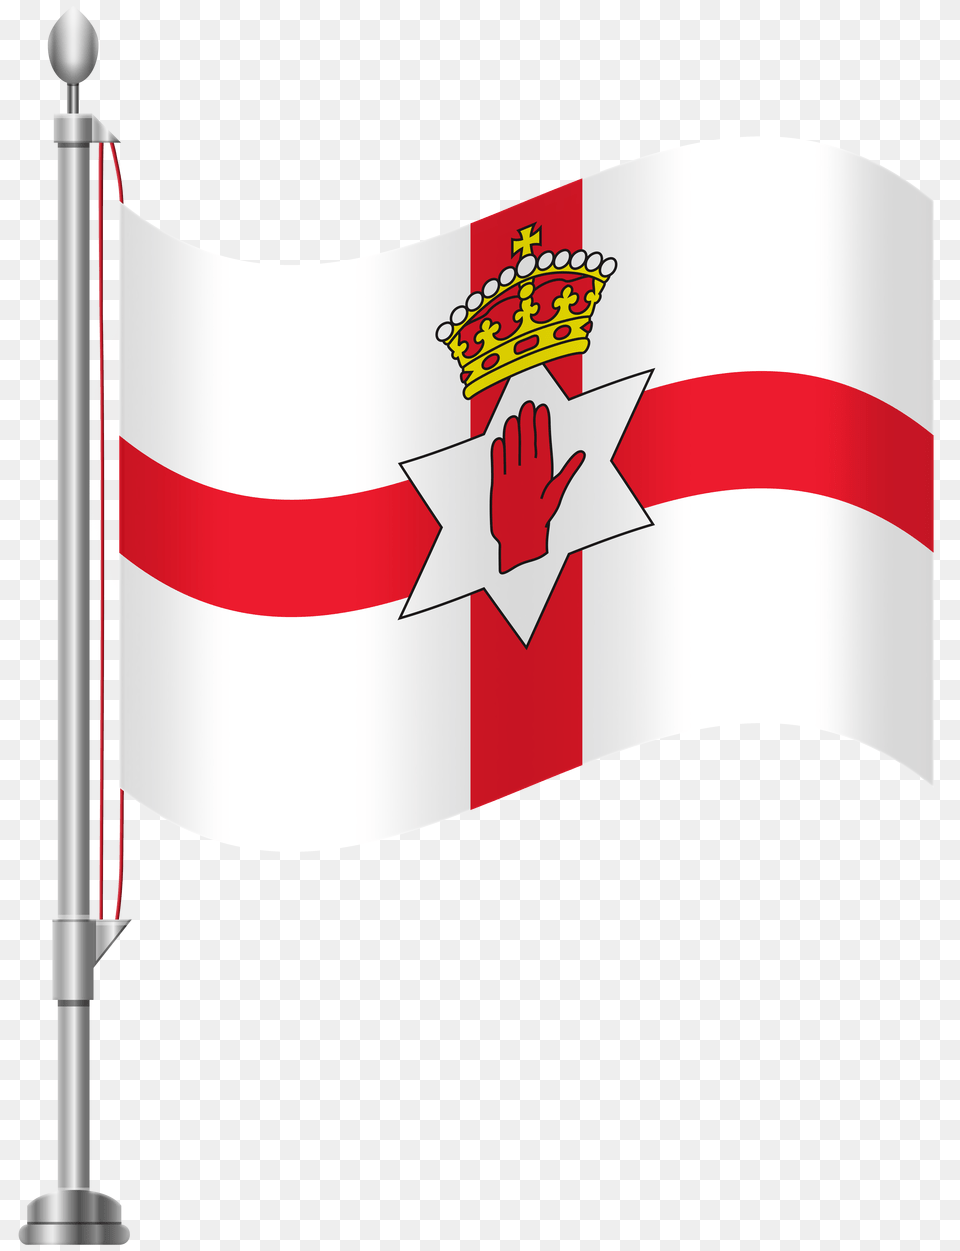 Northern Ireland Flag Clip Art, Dynamite, Weapon Png Image